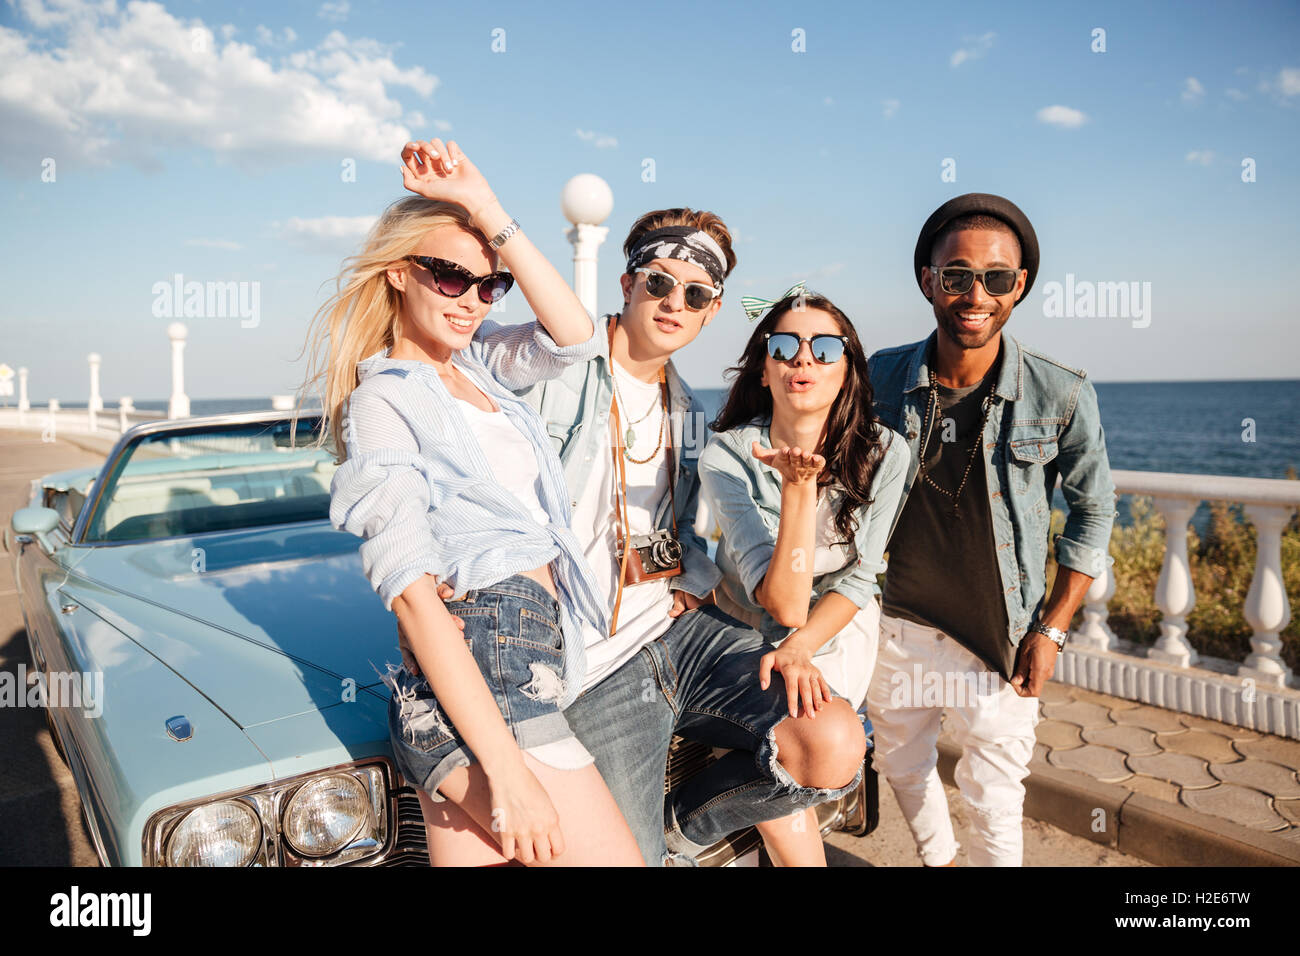 Group of smiling young friends standing outdoors in summer together Stock Photo